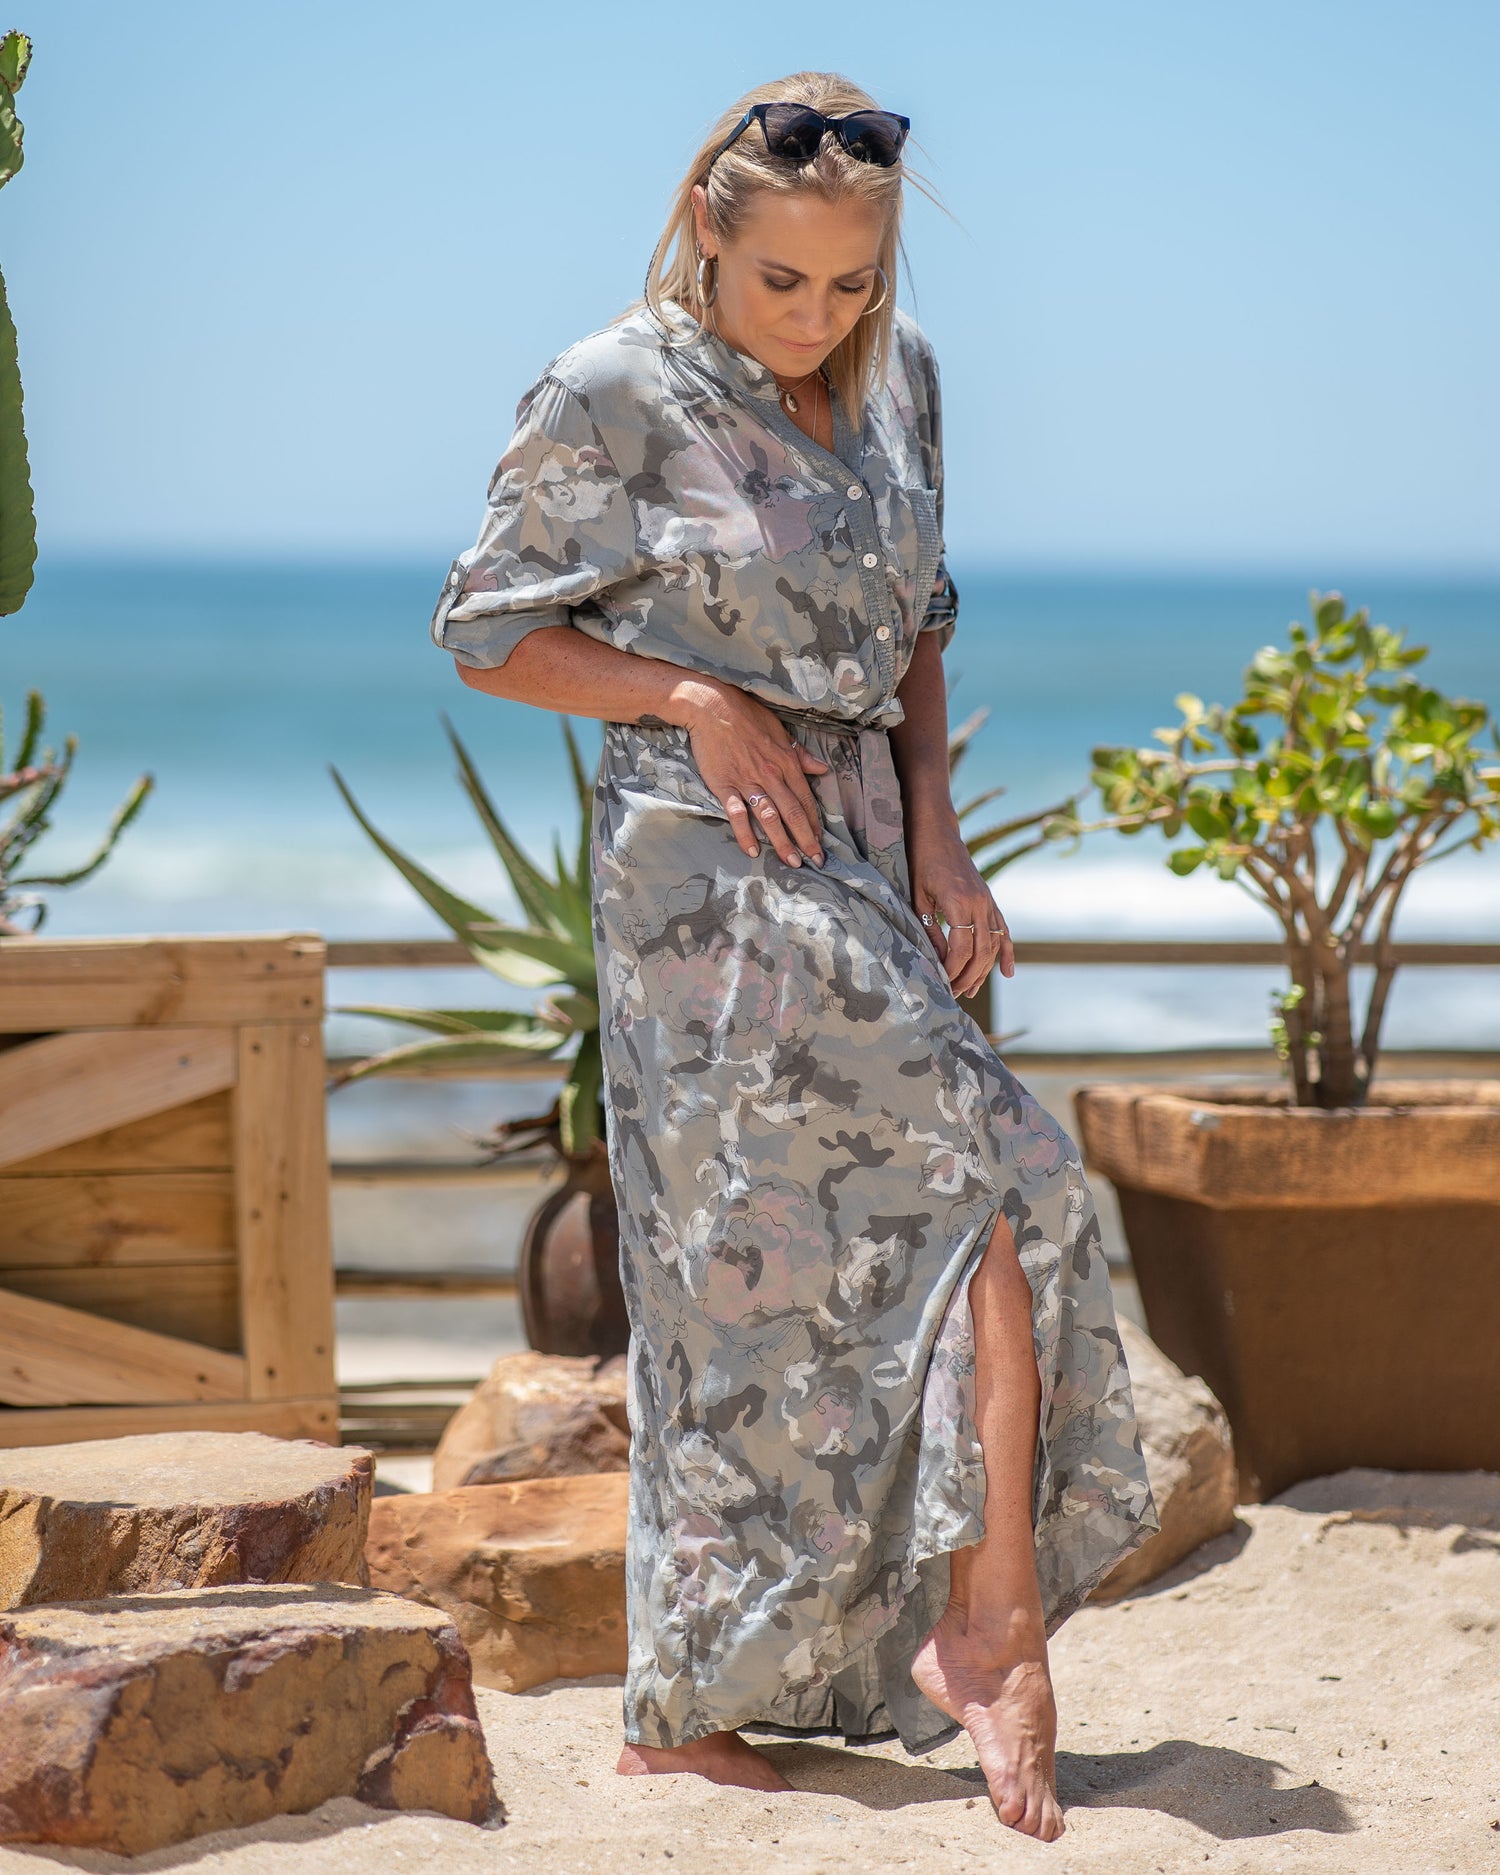 Where comfort meets sophistication in the most effortless way possible. The maxi length of this dress offers a versatile silhouette that is both chic and comfortable, making it suitable for various occasions